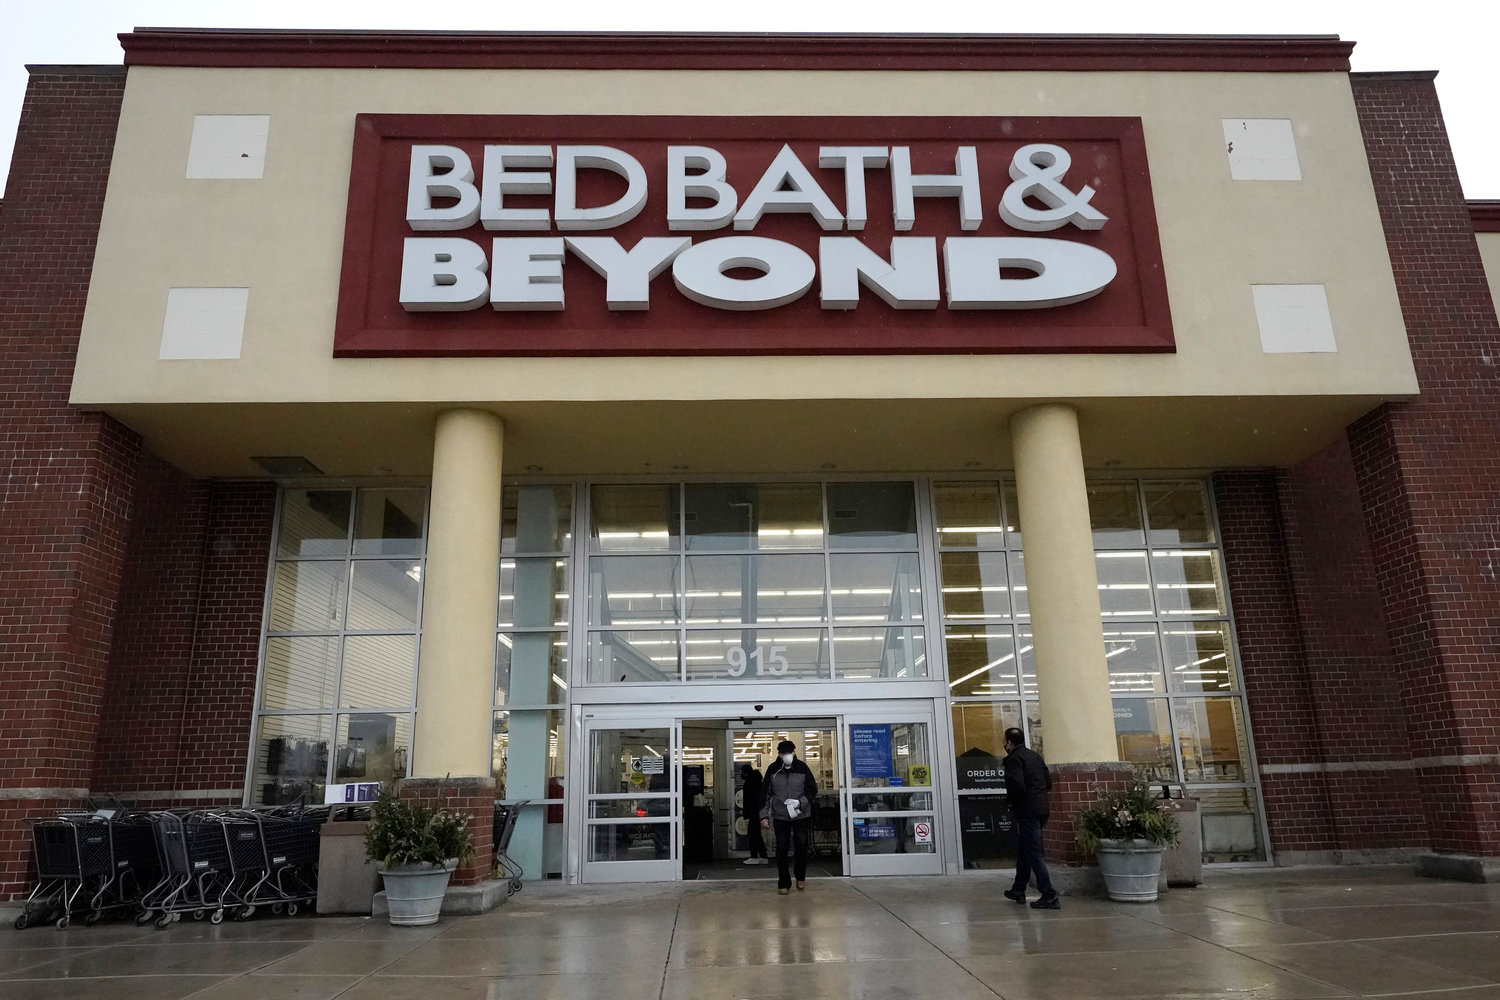 Shoppers enter and exit a Bed Bath & Beyond in Schaumburg, Ill., Jan. 14, 2021. Struggling Bed Bath & Beyond warned on Thursday that there's substantial doubt about the company's ability to continue as a "going concern" even as it continues to look at options like refinancing its debt or restructuring its business in bankruptcy court.